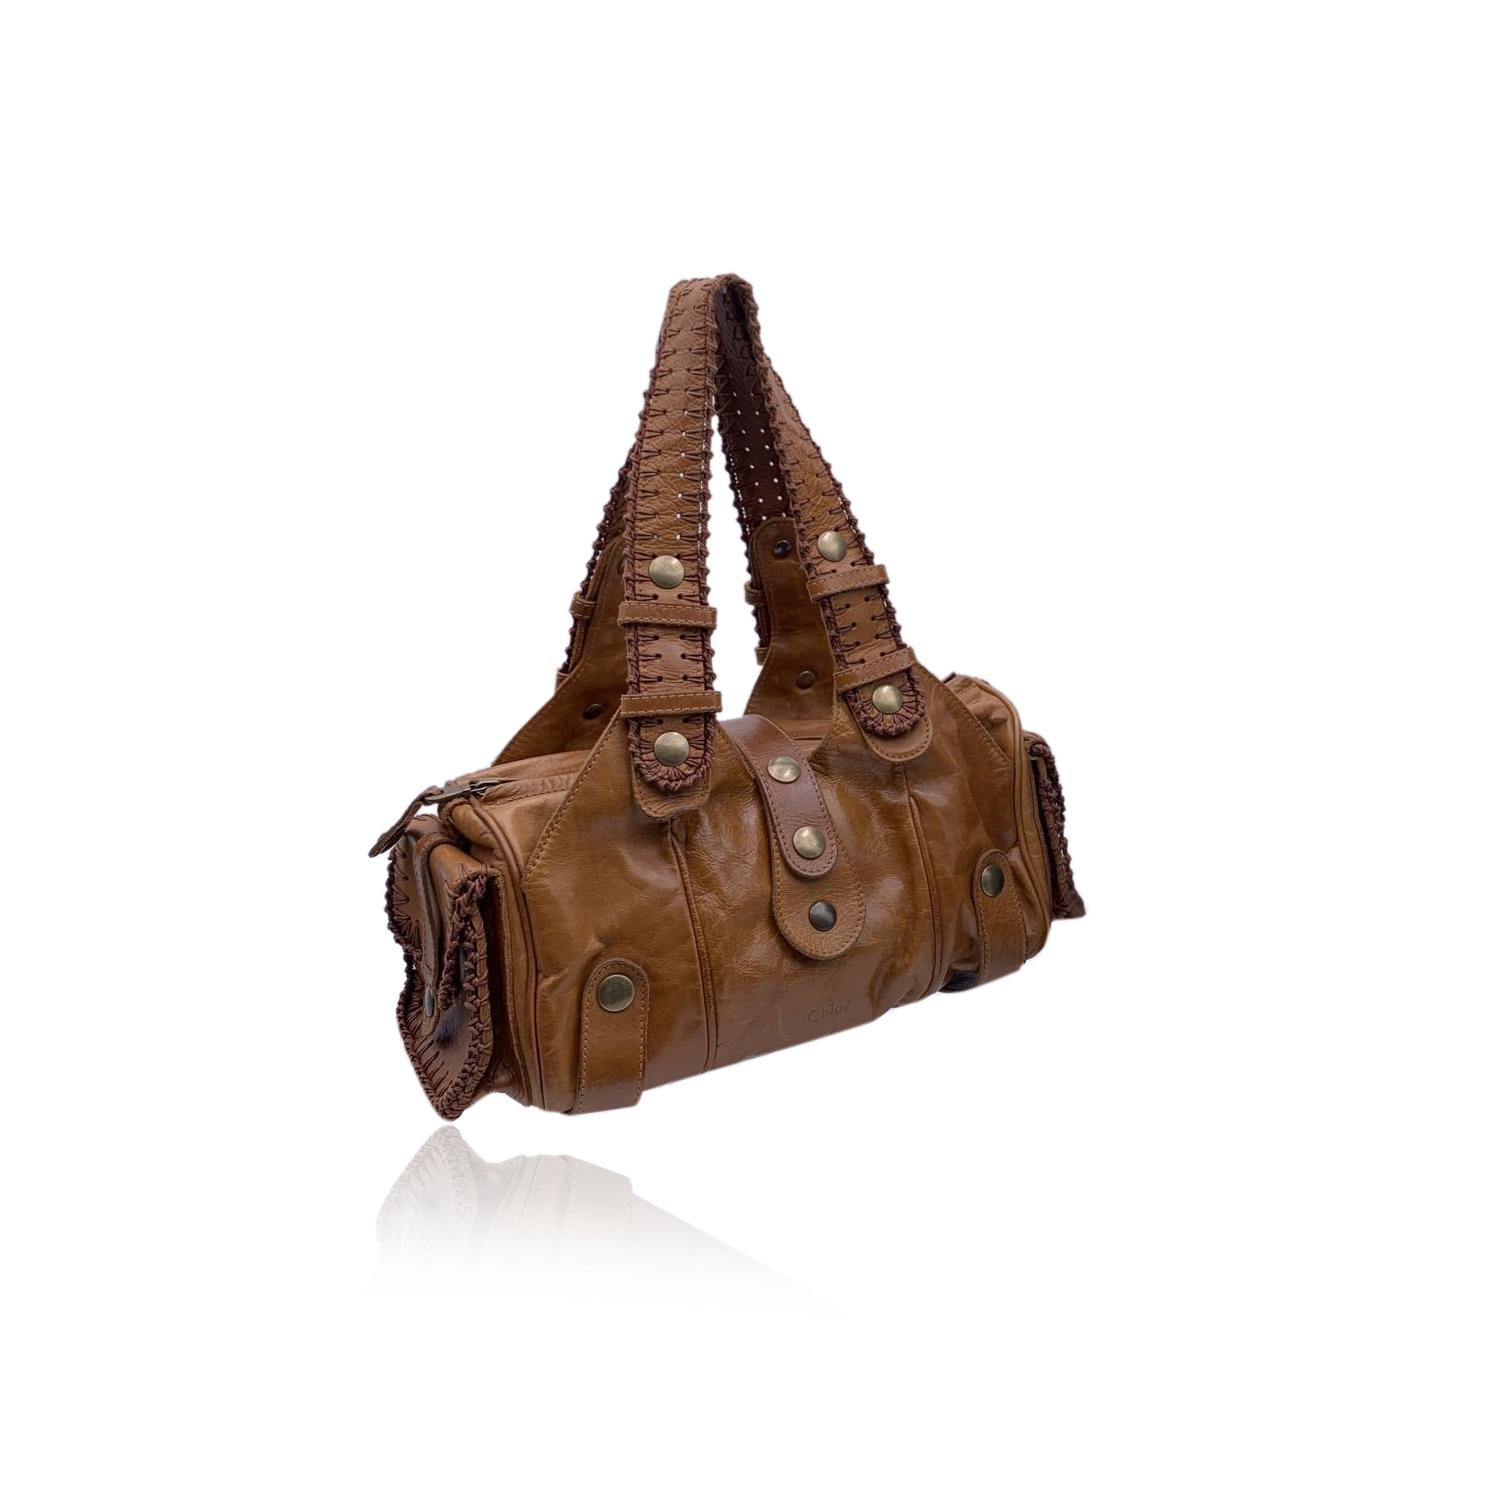 Beautiful CHLOE 'Silverado Bag' crafted in distressed genuine leather in a tan beige color. Western style. 2 side pockets and 2 exterior open compartments. Beige lining. Upper zipper closure. 1 side zip pocket inside. 'CHLOE - Made in italy'